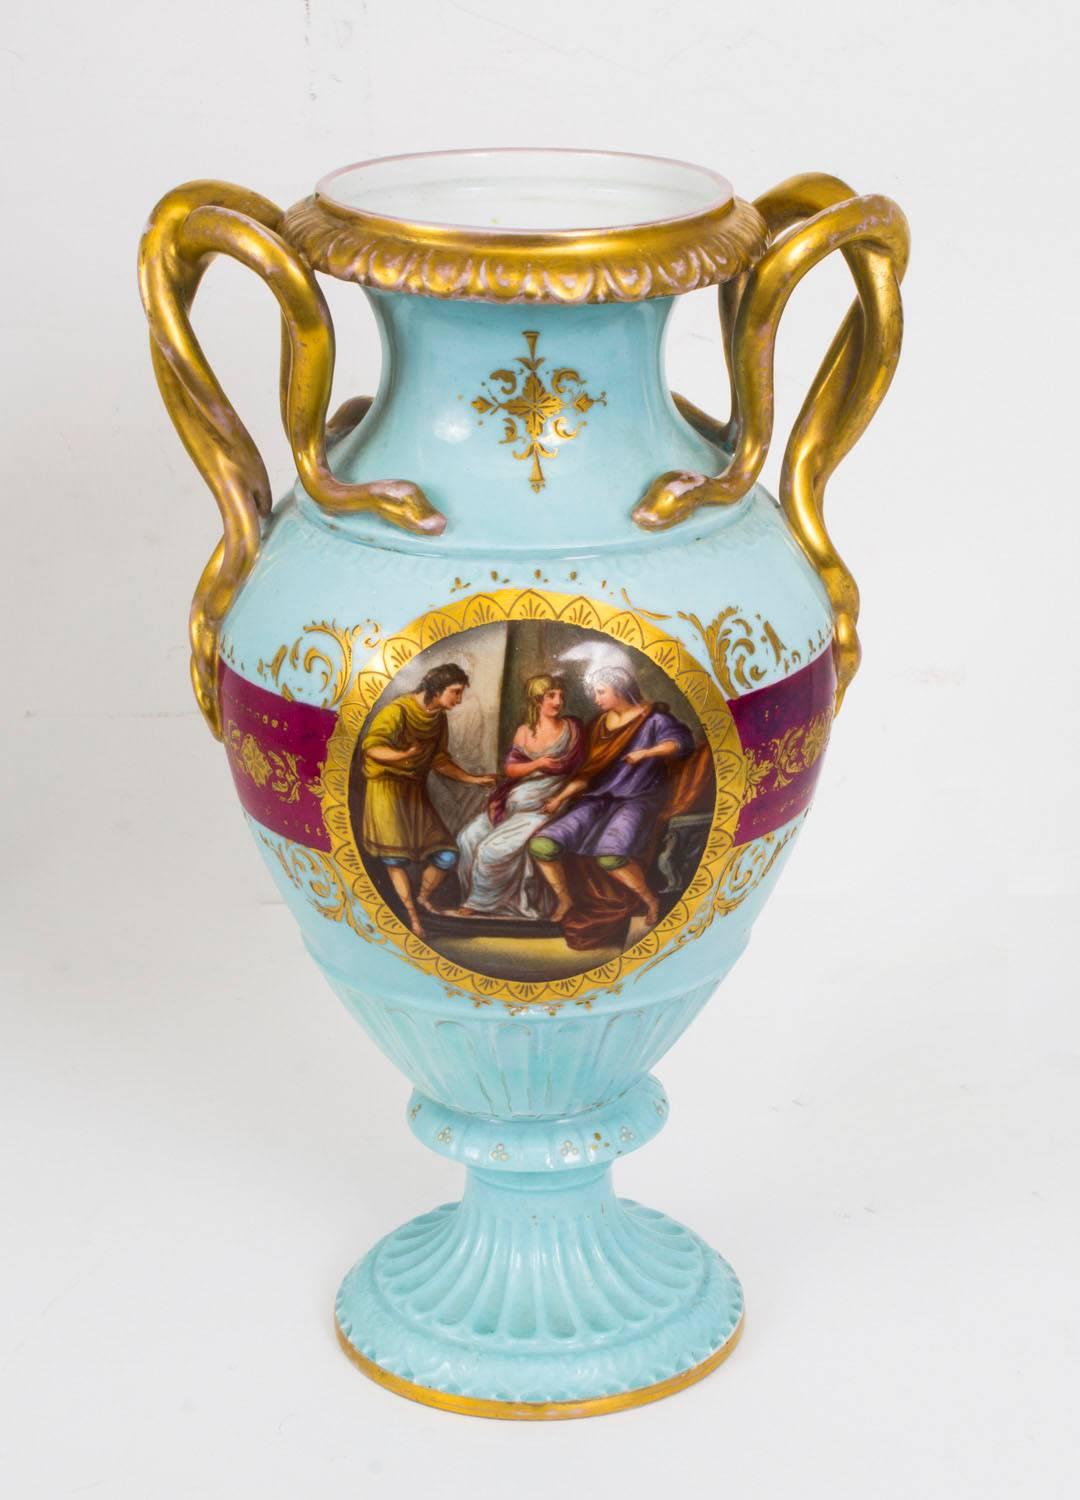 This is a wonderful pair of antique Vienna porcelain two handled classical vases with serpent handles, circa 1880 in date.

Each with hand painted figural panels on a bleu celeste and purple Royale ground, with gilded decoration and bearing the